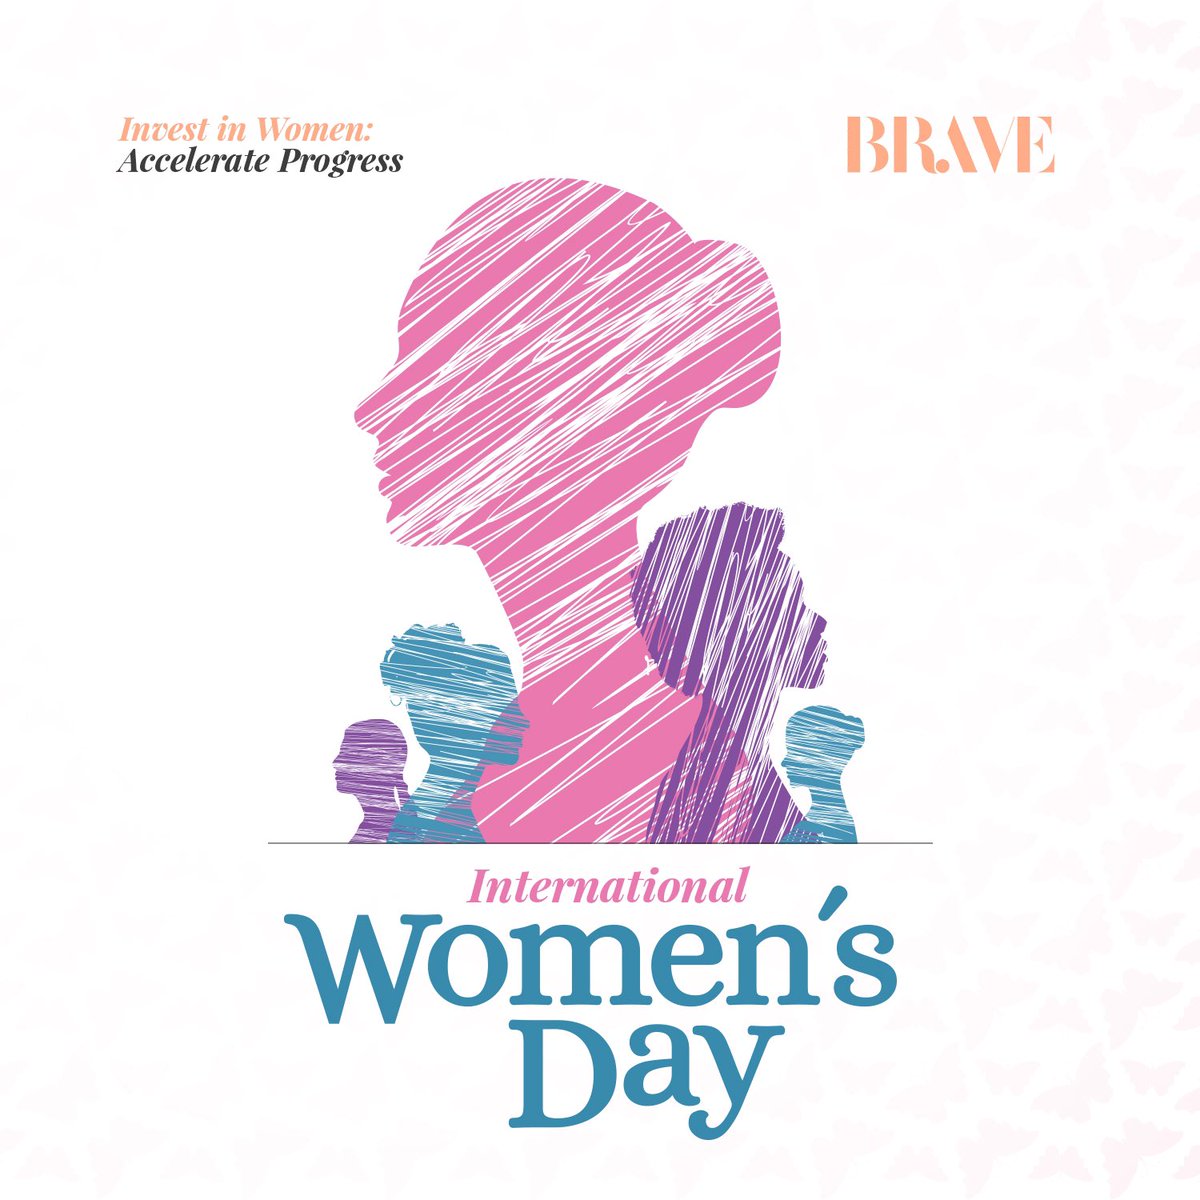 Championing the bold strides of women today and every day. BRAVE uplifts the spirits and dreams of women across the globe on International Women's Day. Together, we forge a path of progress, unity, and relentless courage. 
#BeBrave #WomensDay #ShapeTomorrow'